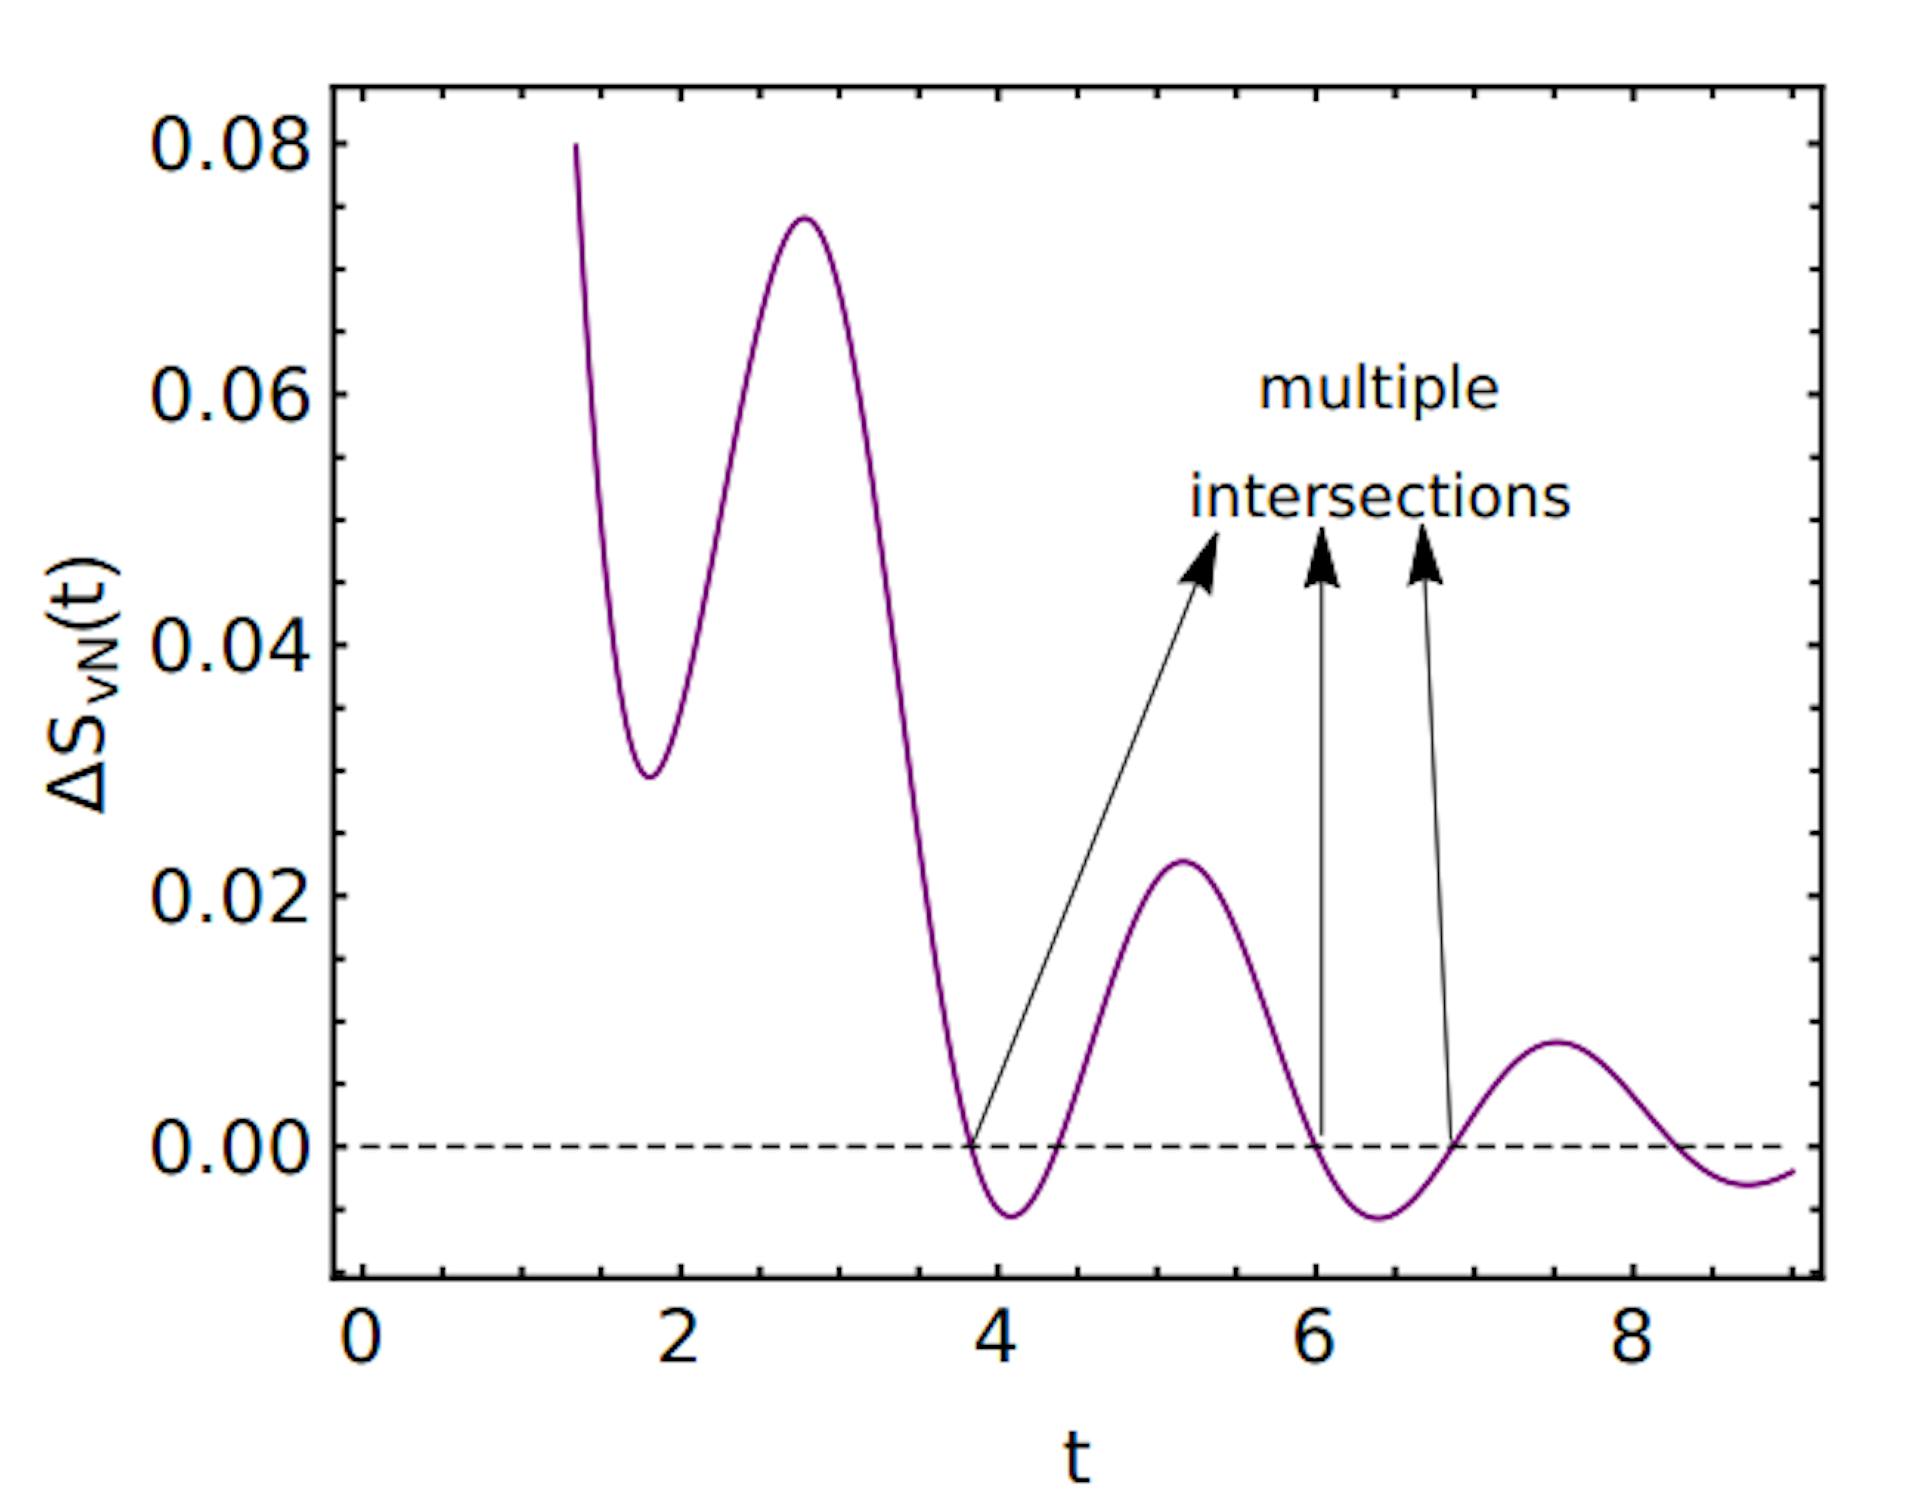 FIG. 9. The figure shows the temporal behavior of the difference between von Neumann entropies of two copies I and II, in region (a1). The entity ∆SvN(t) intersect zero multiple times indicating the occurrence of multiple QMPE. Parameters used are same as in Figs. 7.